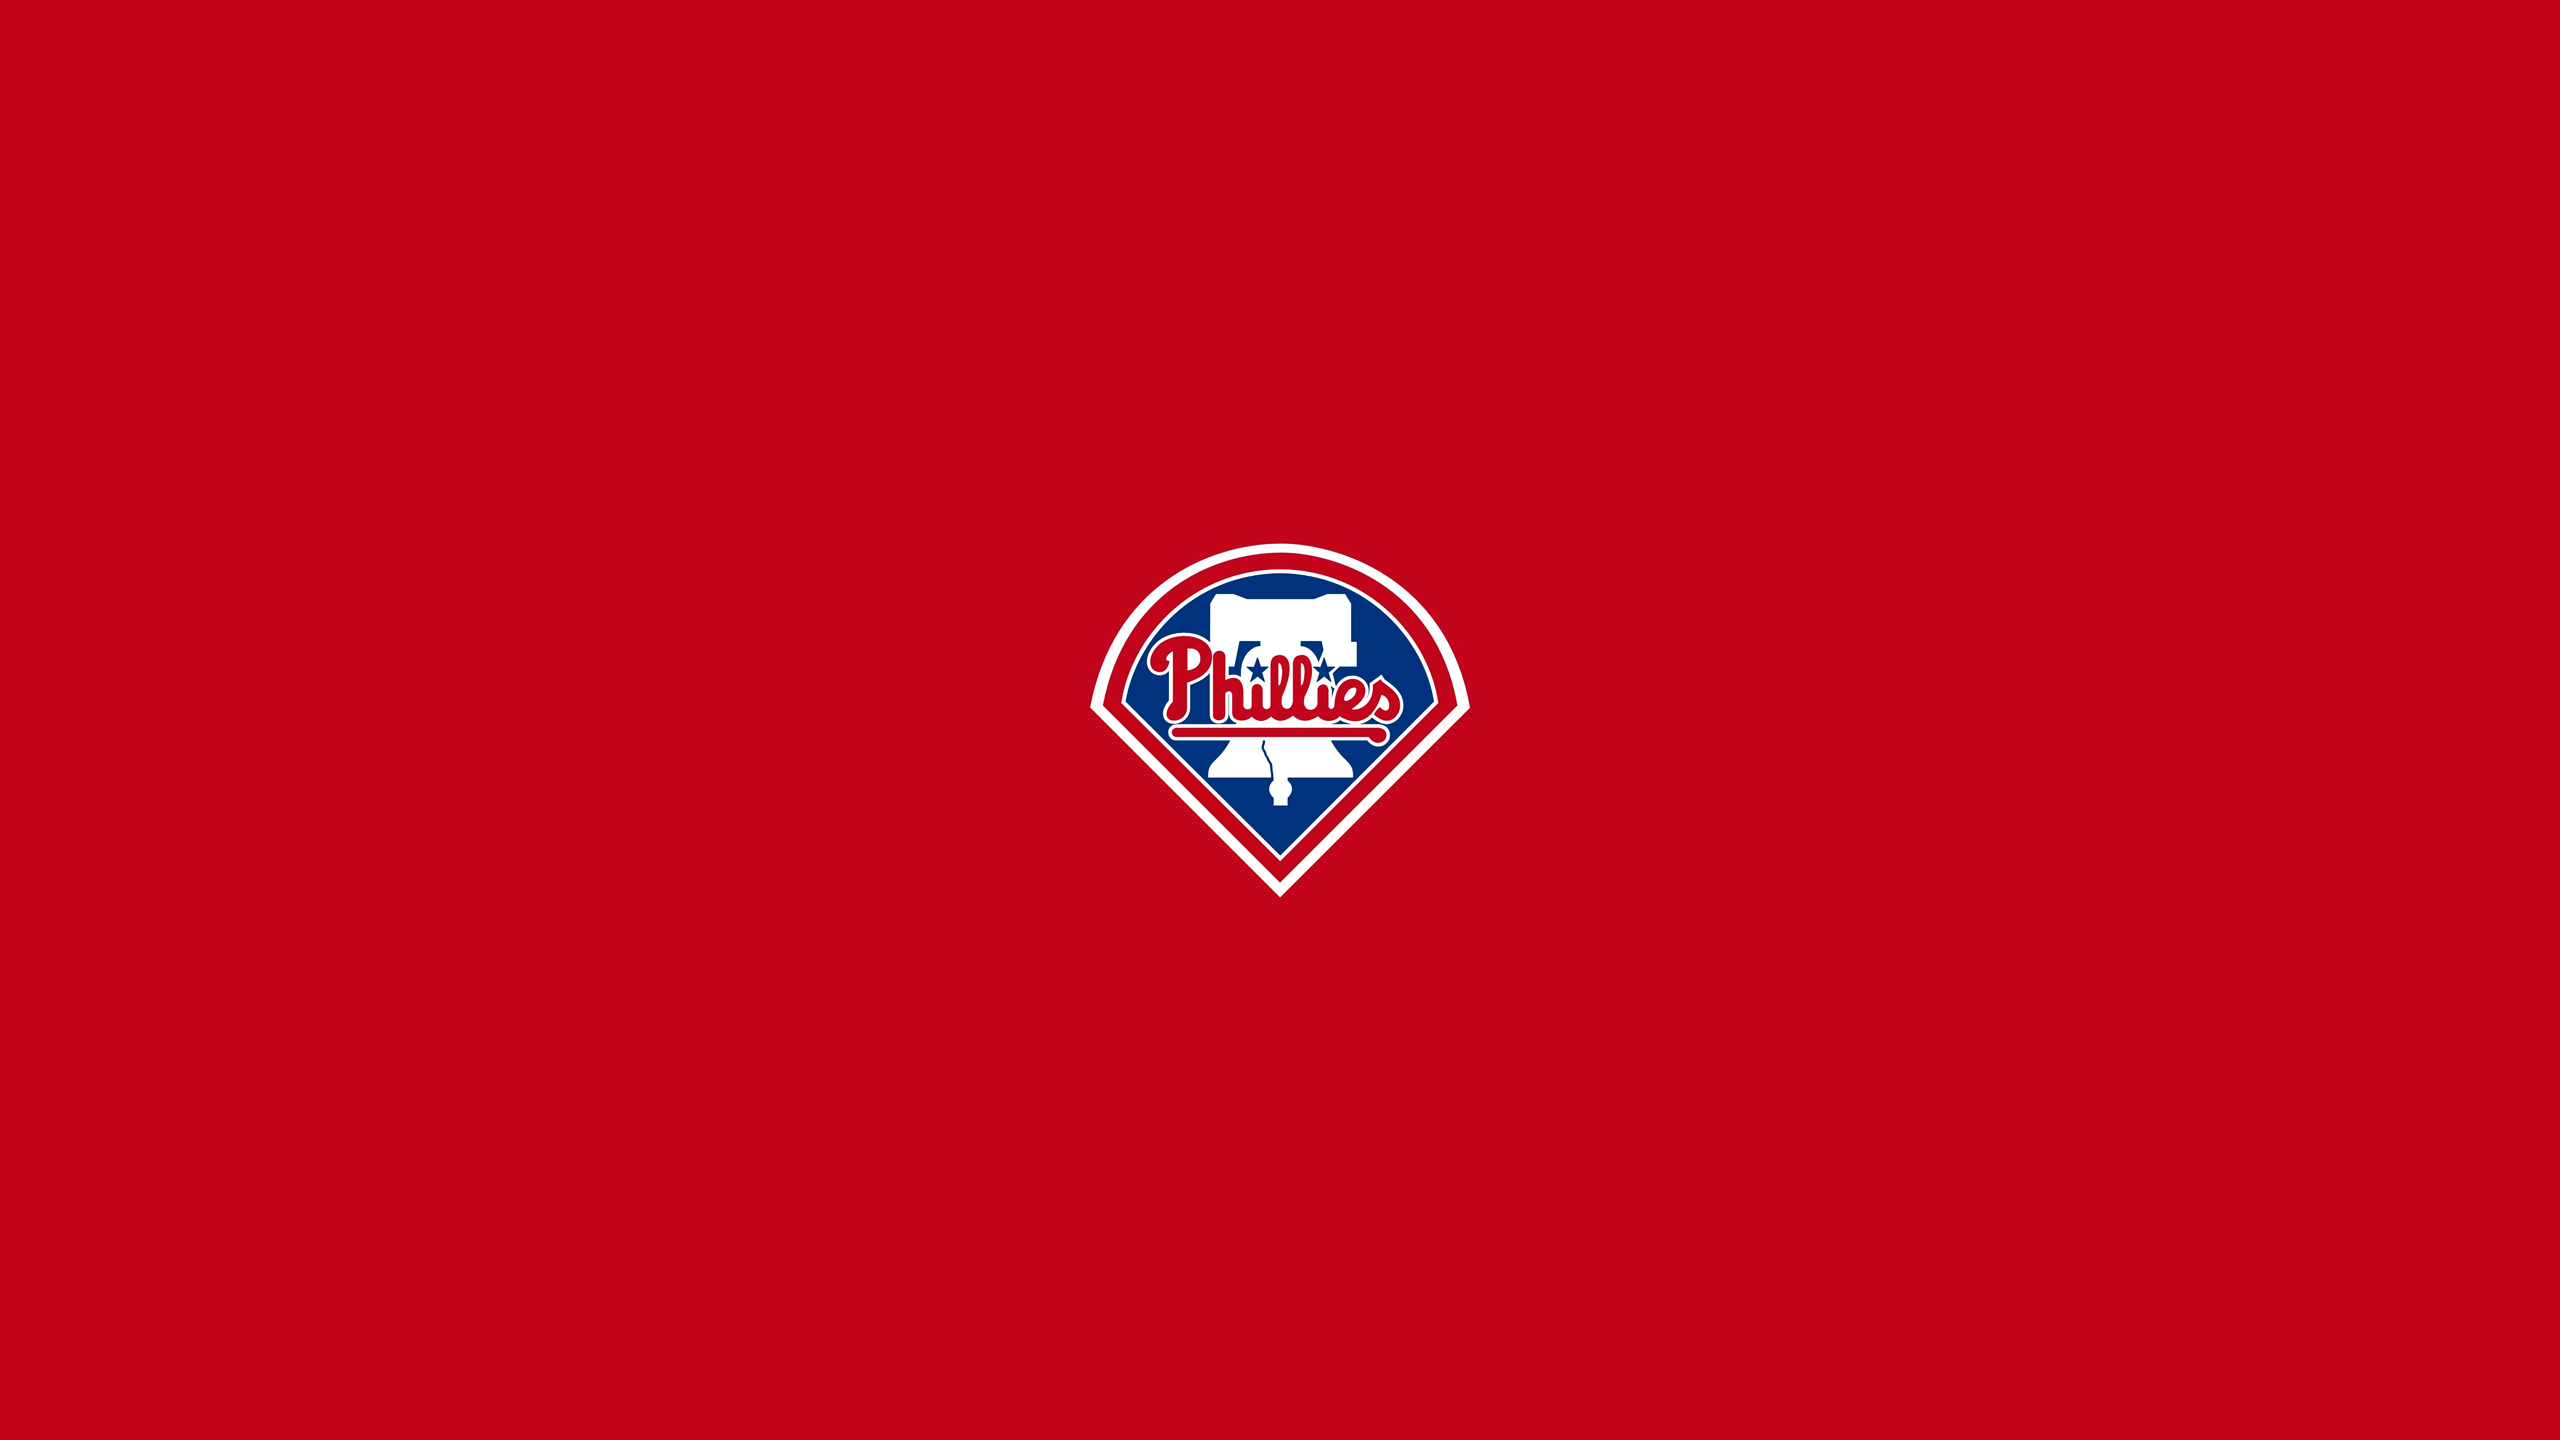 Download Philadelphia Phillies wallpapers for mobile phone, free  Philadelphia Phillies HD pictures